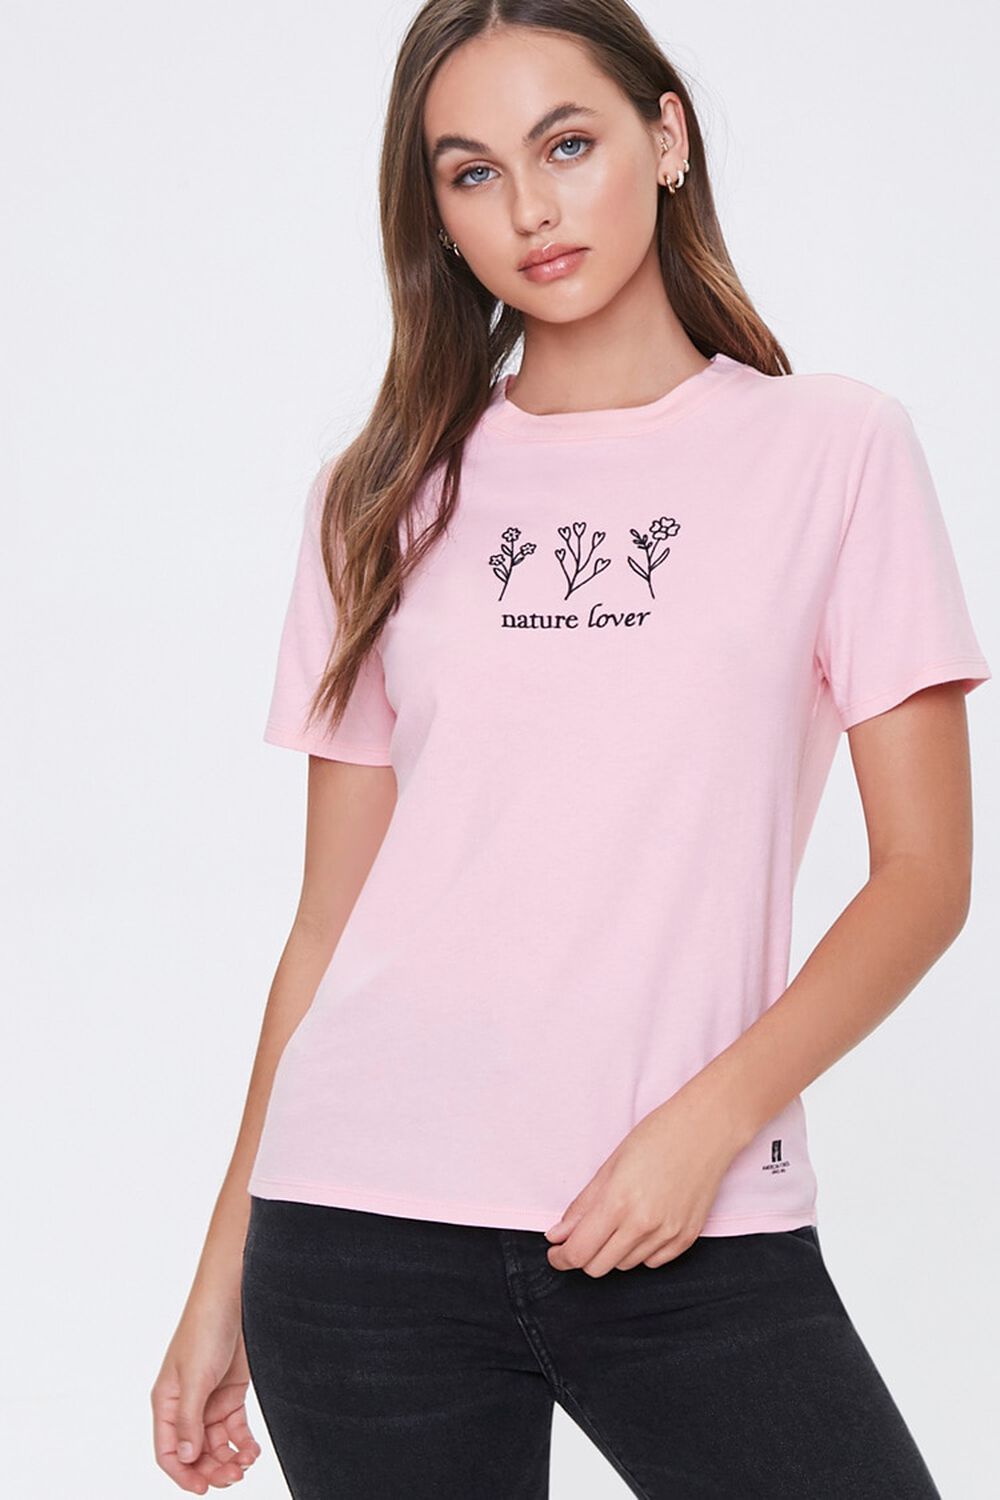 BLUSH/BLACK American Forests Nature Lover Tee, image 1